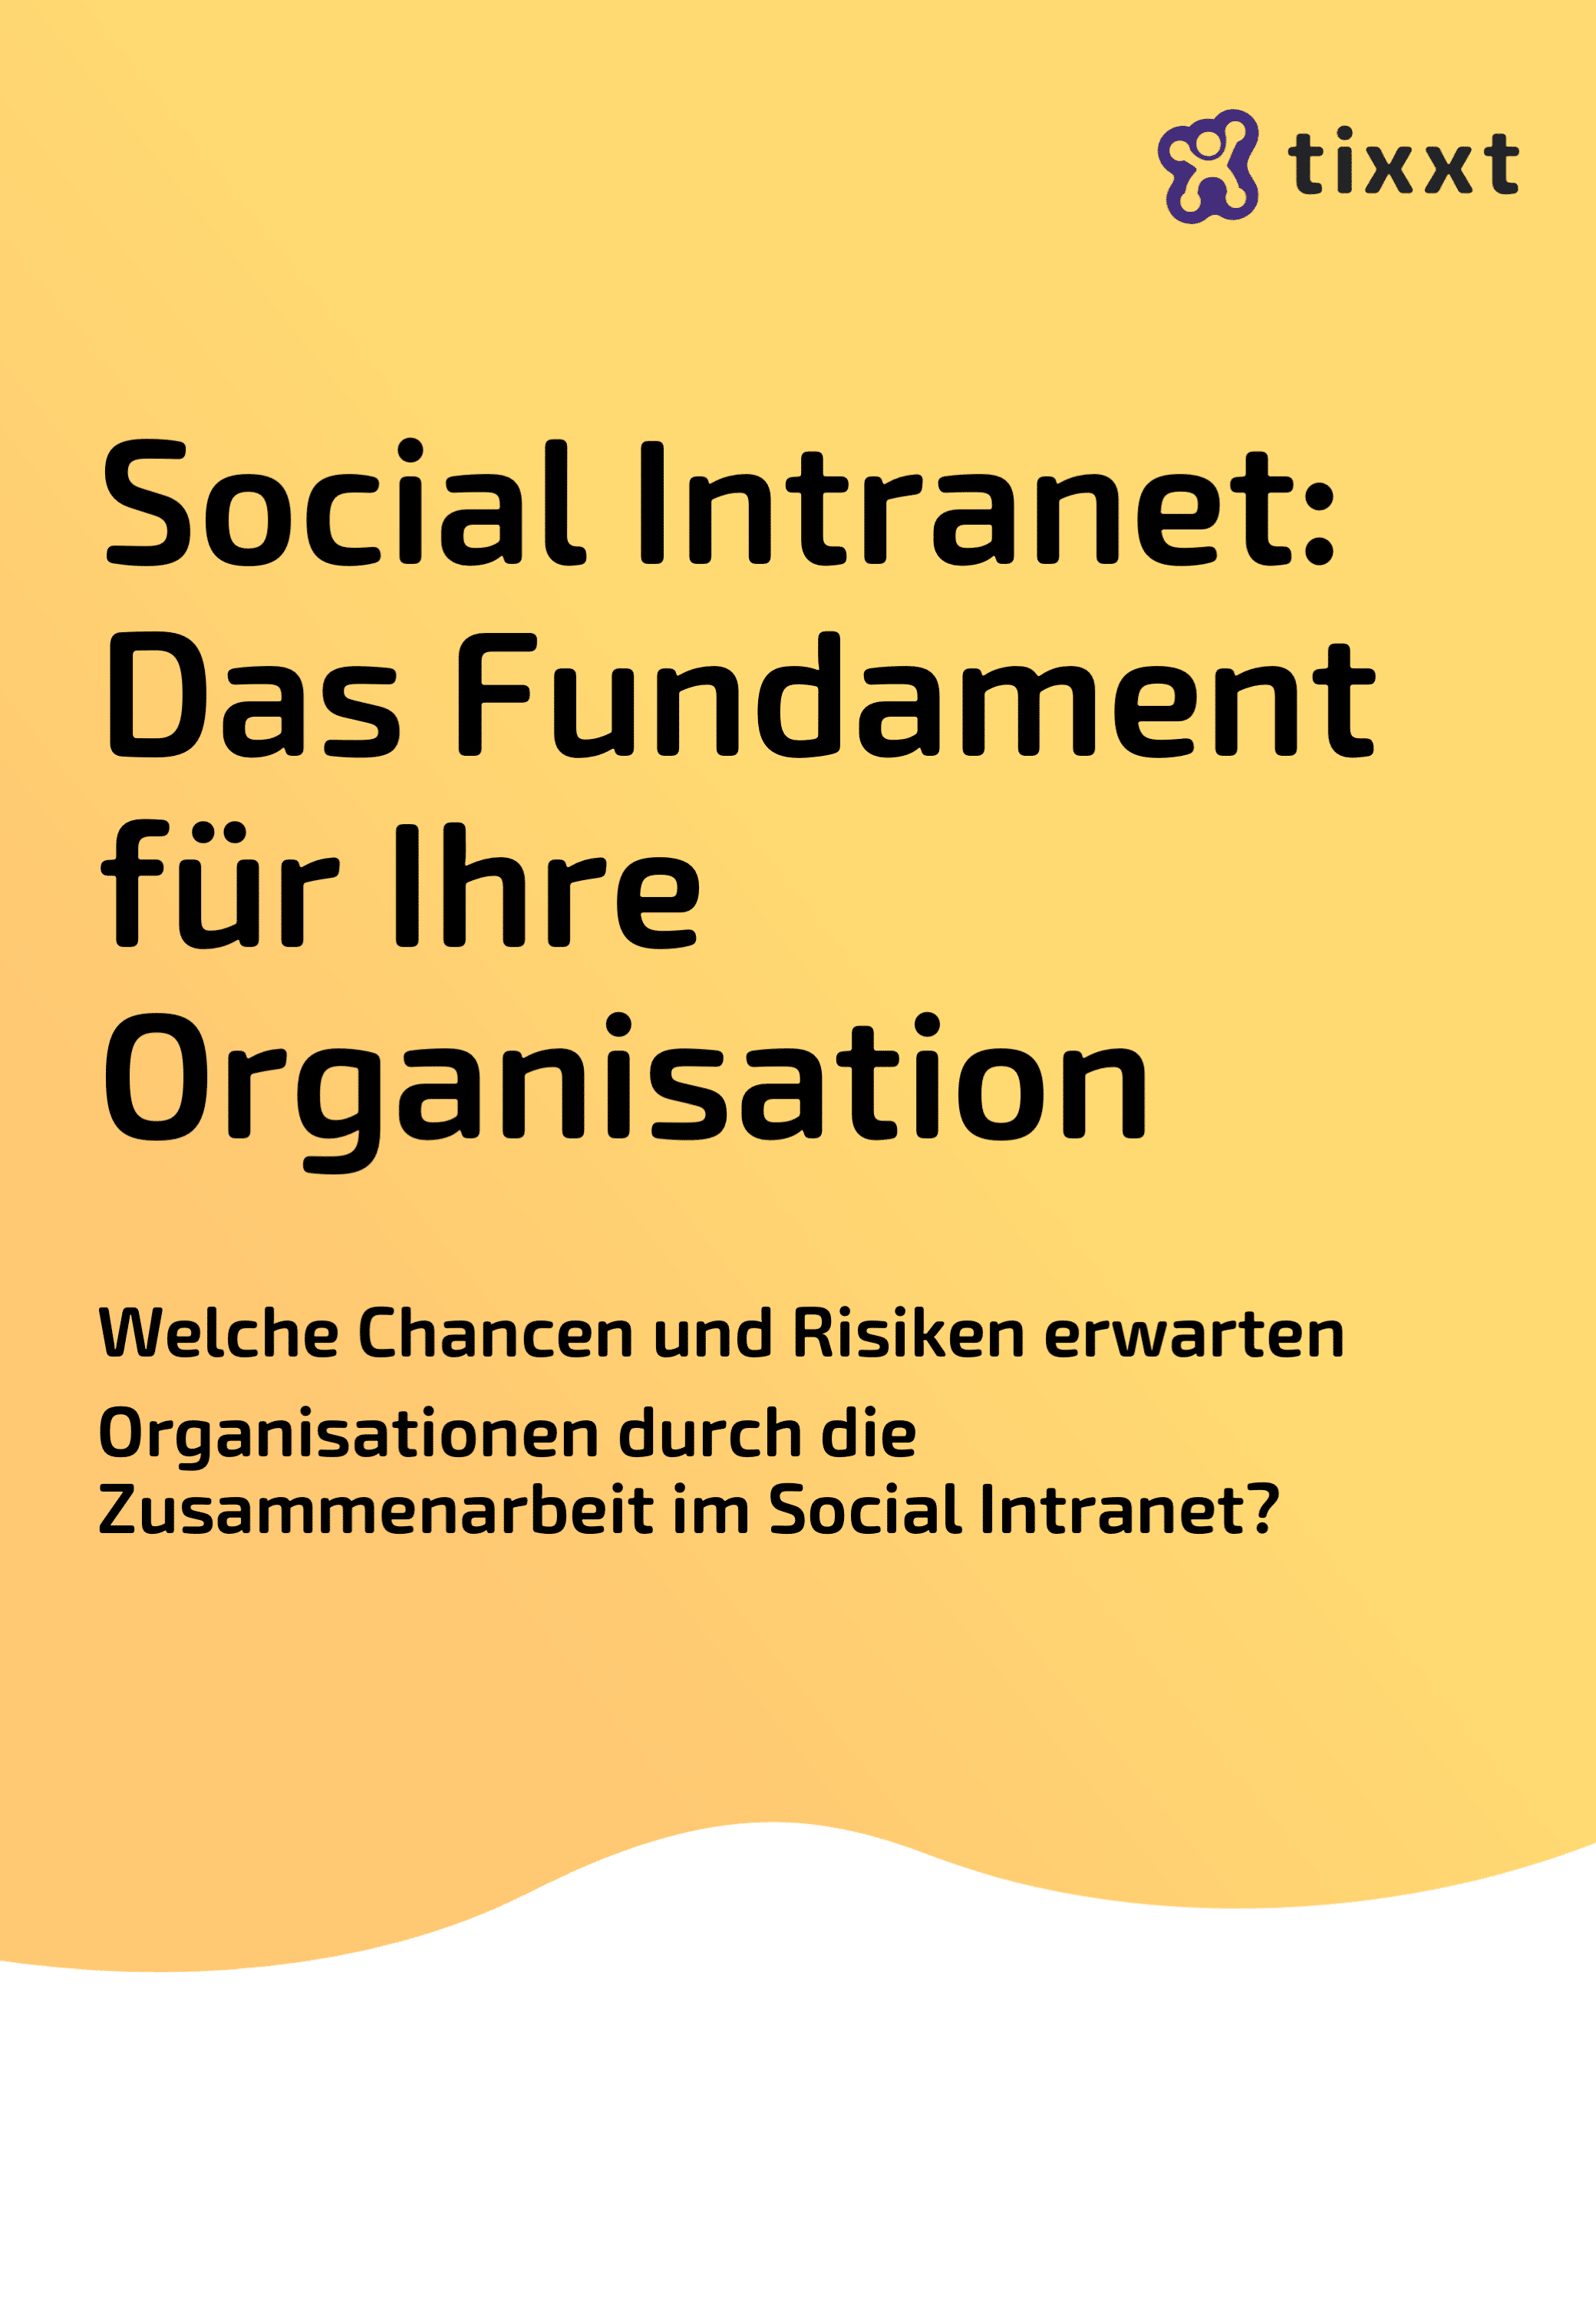 white-paper-cover-social-intranet